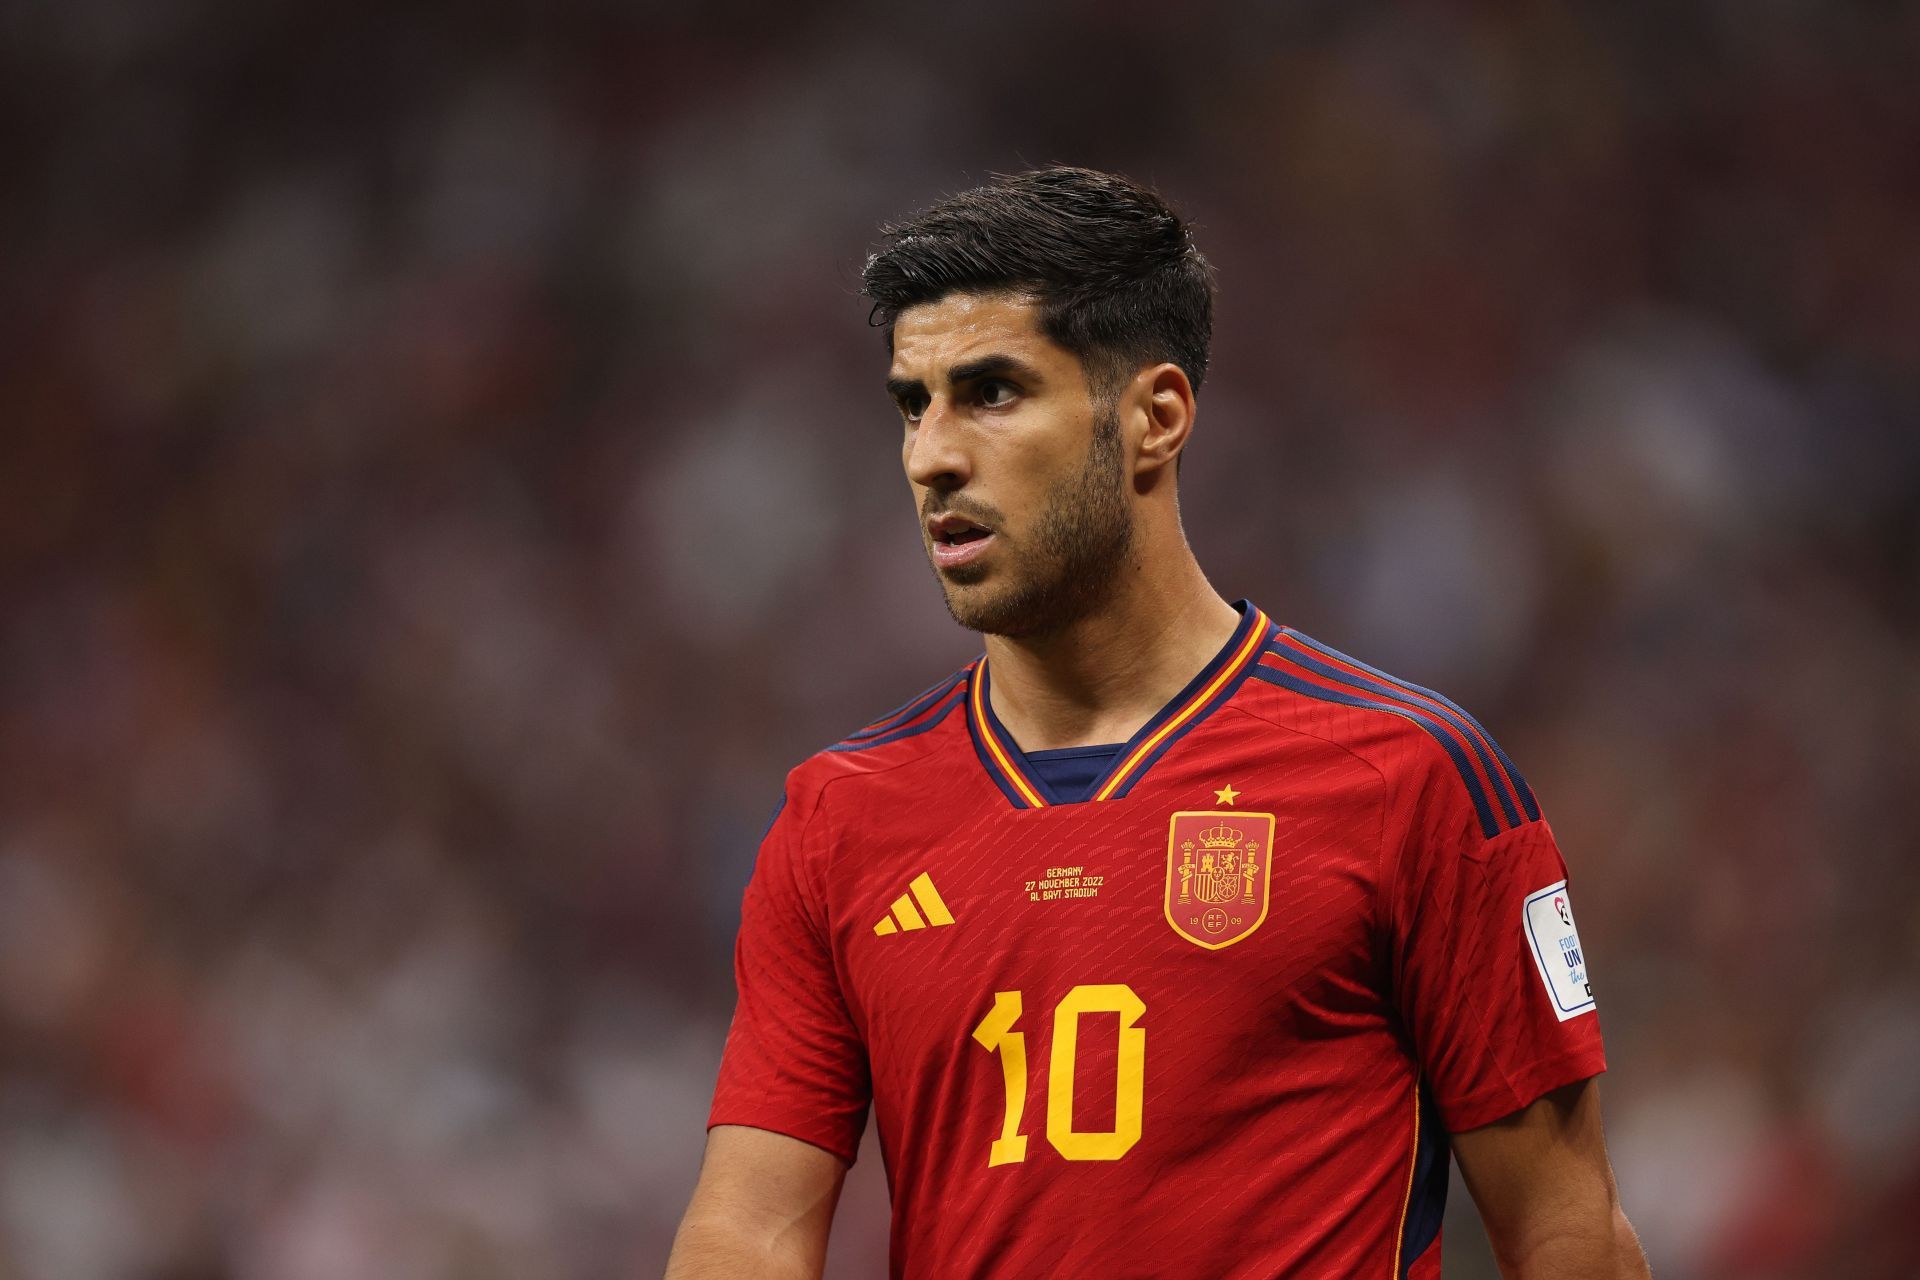 Marco Asensio has been linked with a move away from the Santiago Bernabeu.